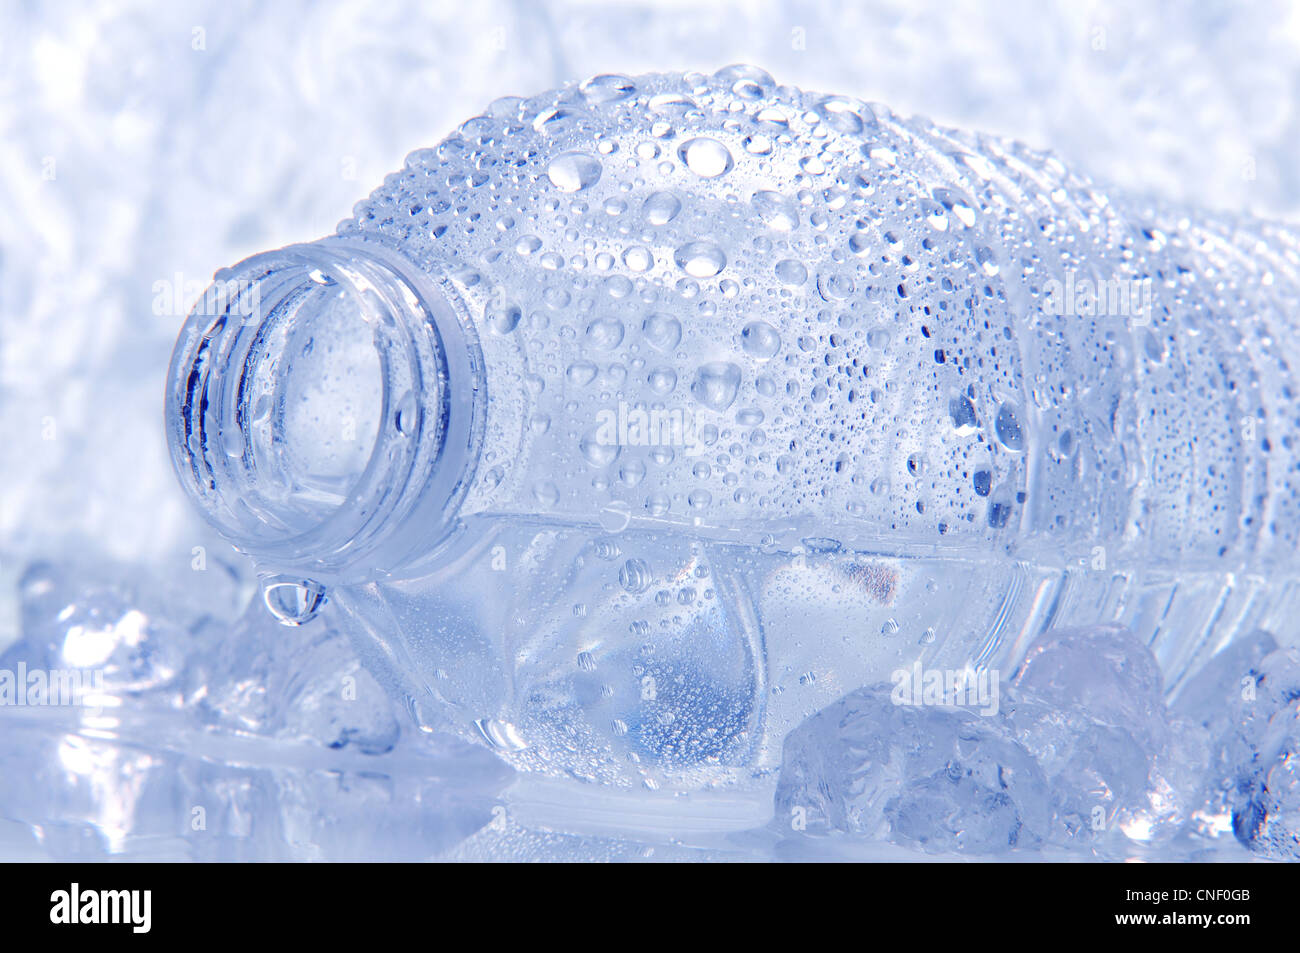 Closeup of a water bottle laying on its side with droplets and drip coming out of the opening. Stock Photo